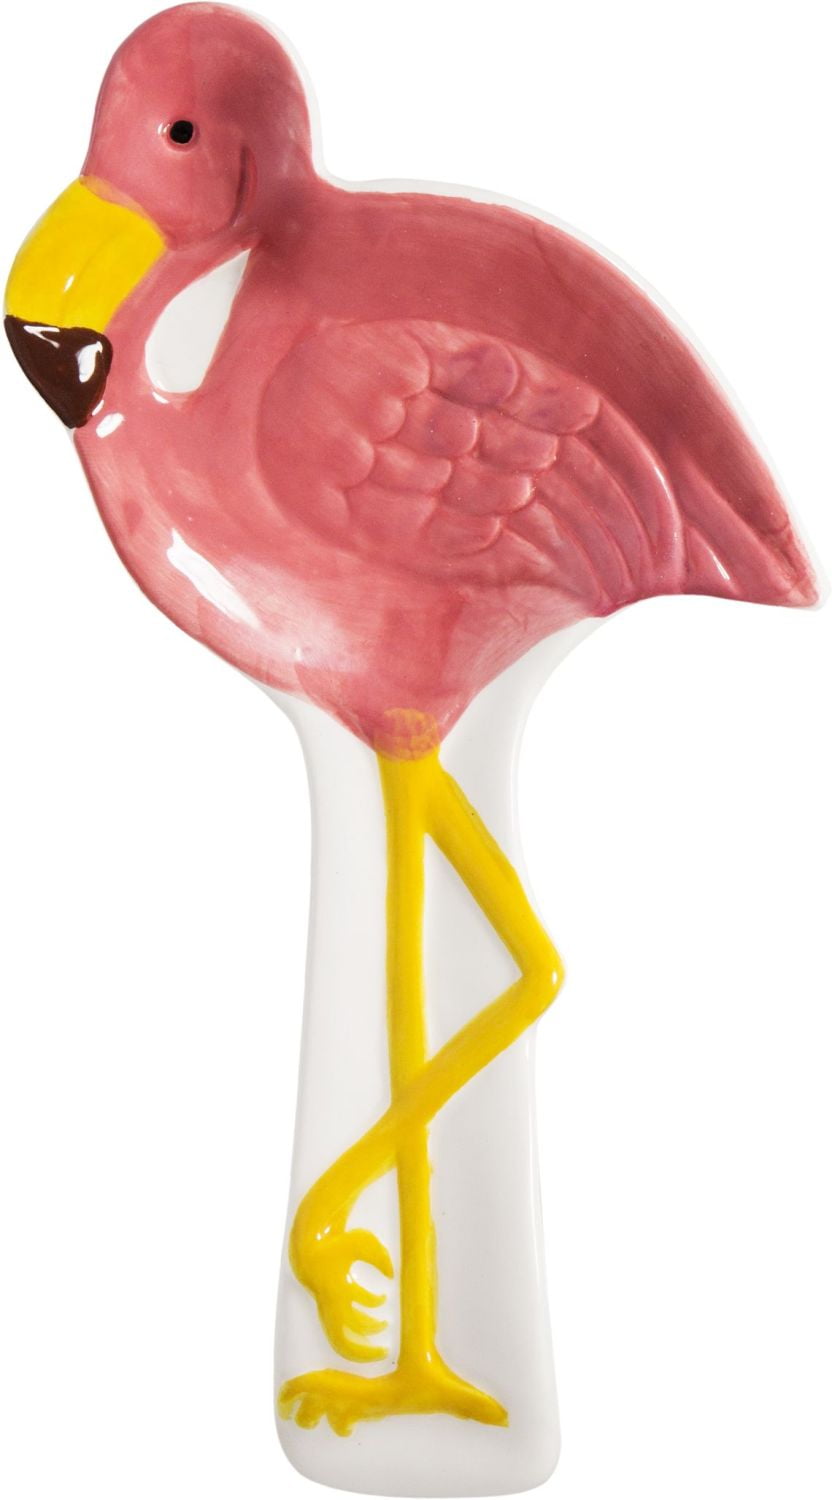 Pretty Pink Flamingo Spoon Rest Kitchen Counter or Stovetop 